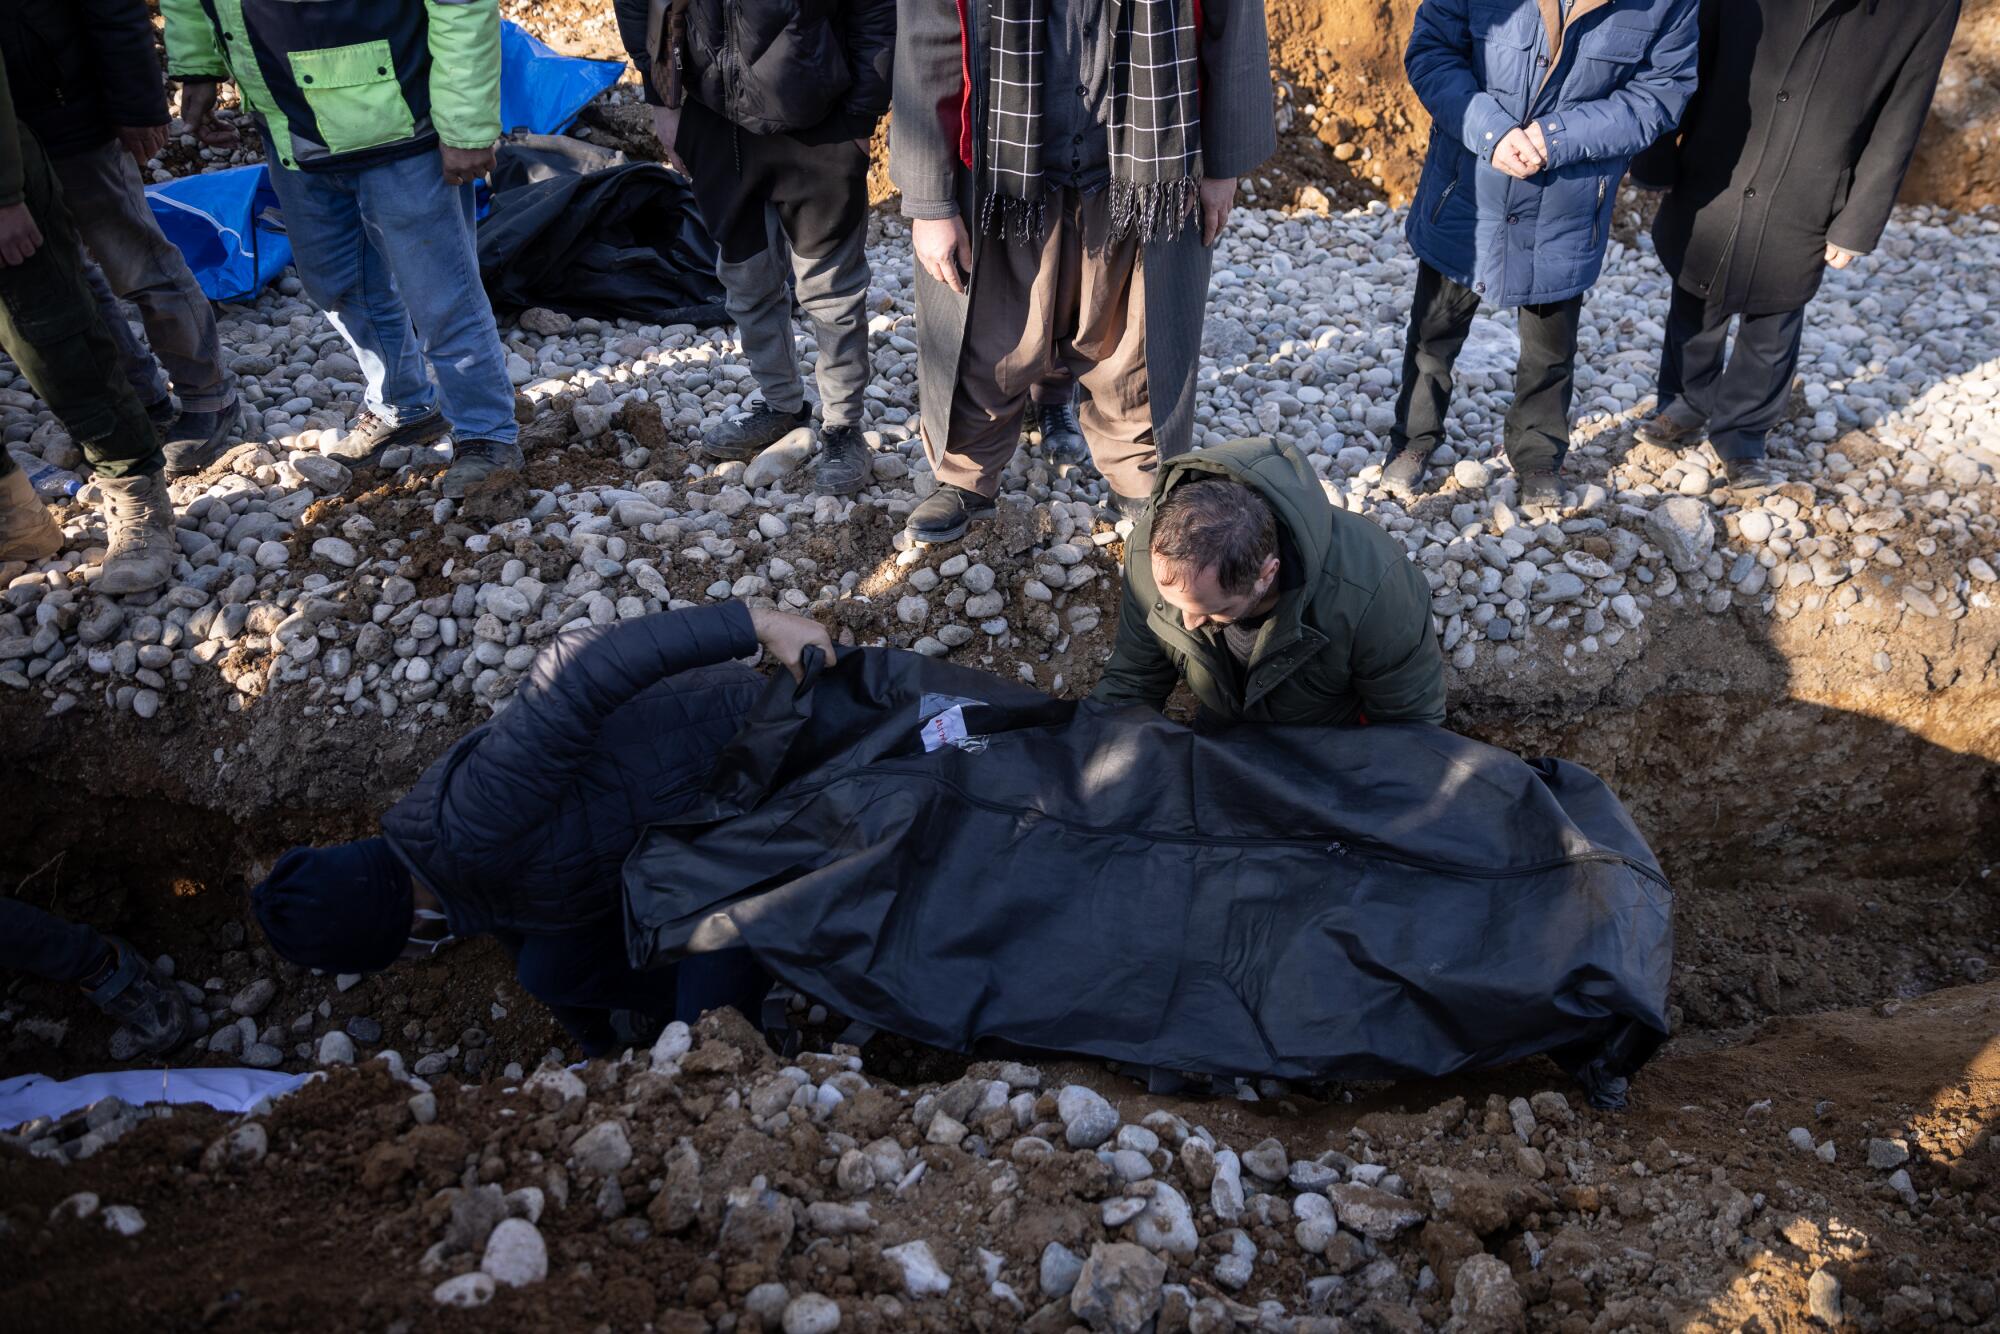 Men placing a body in a black body bag in a dirt trench as mourners stand at the edge 